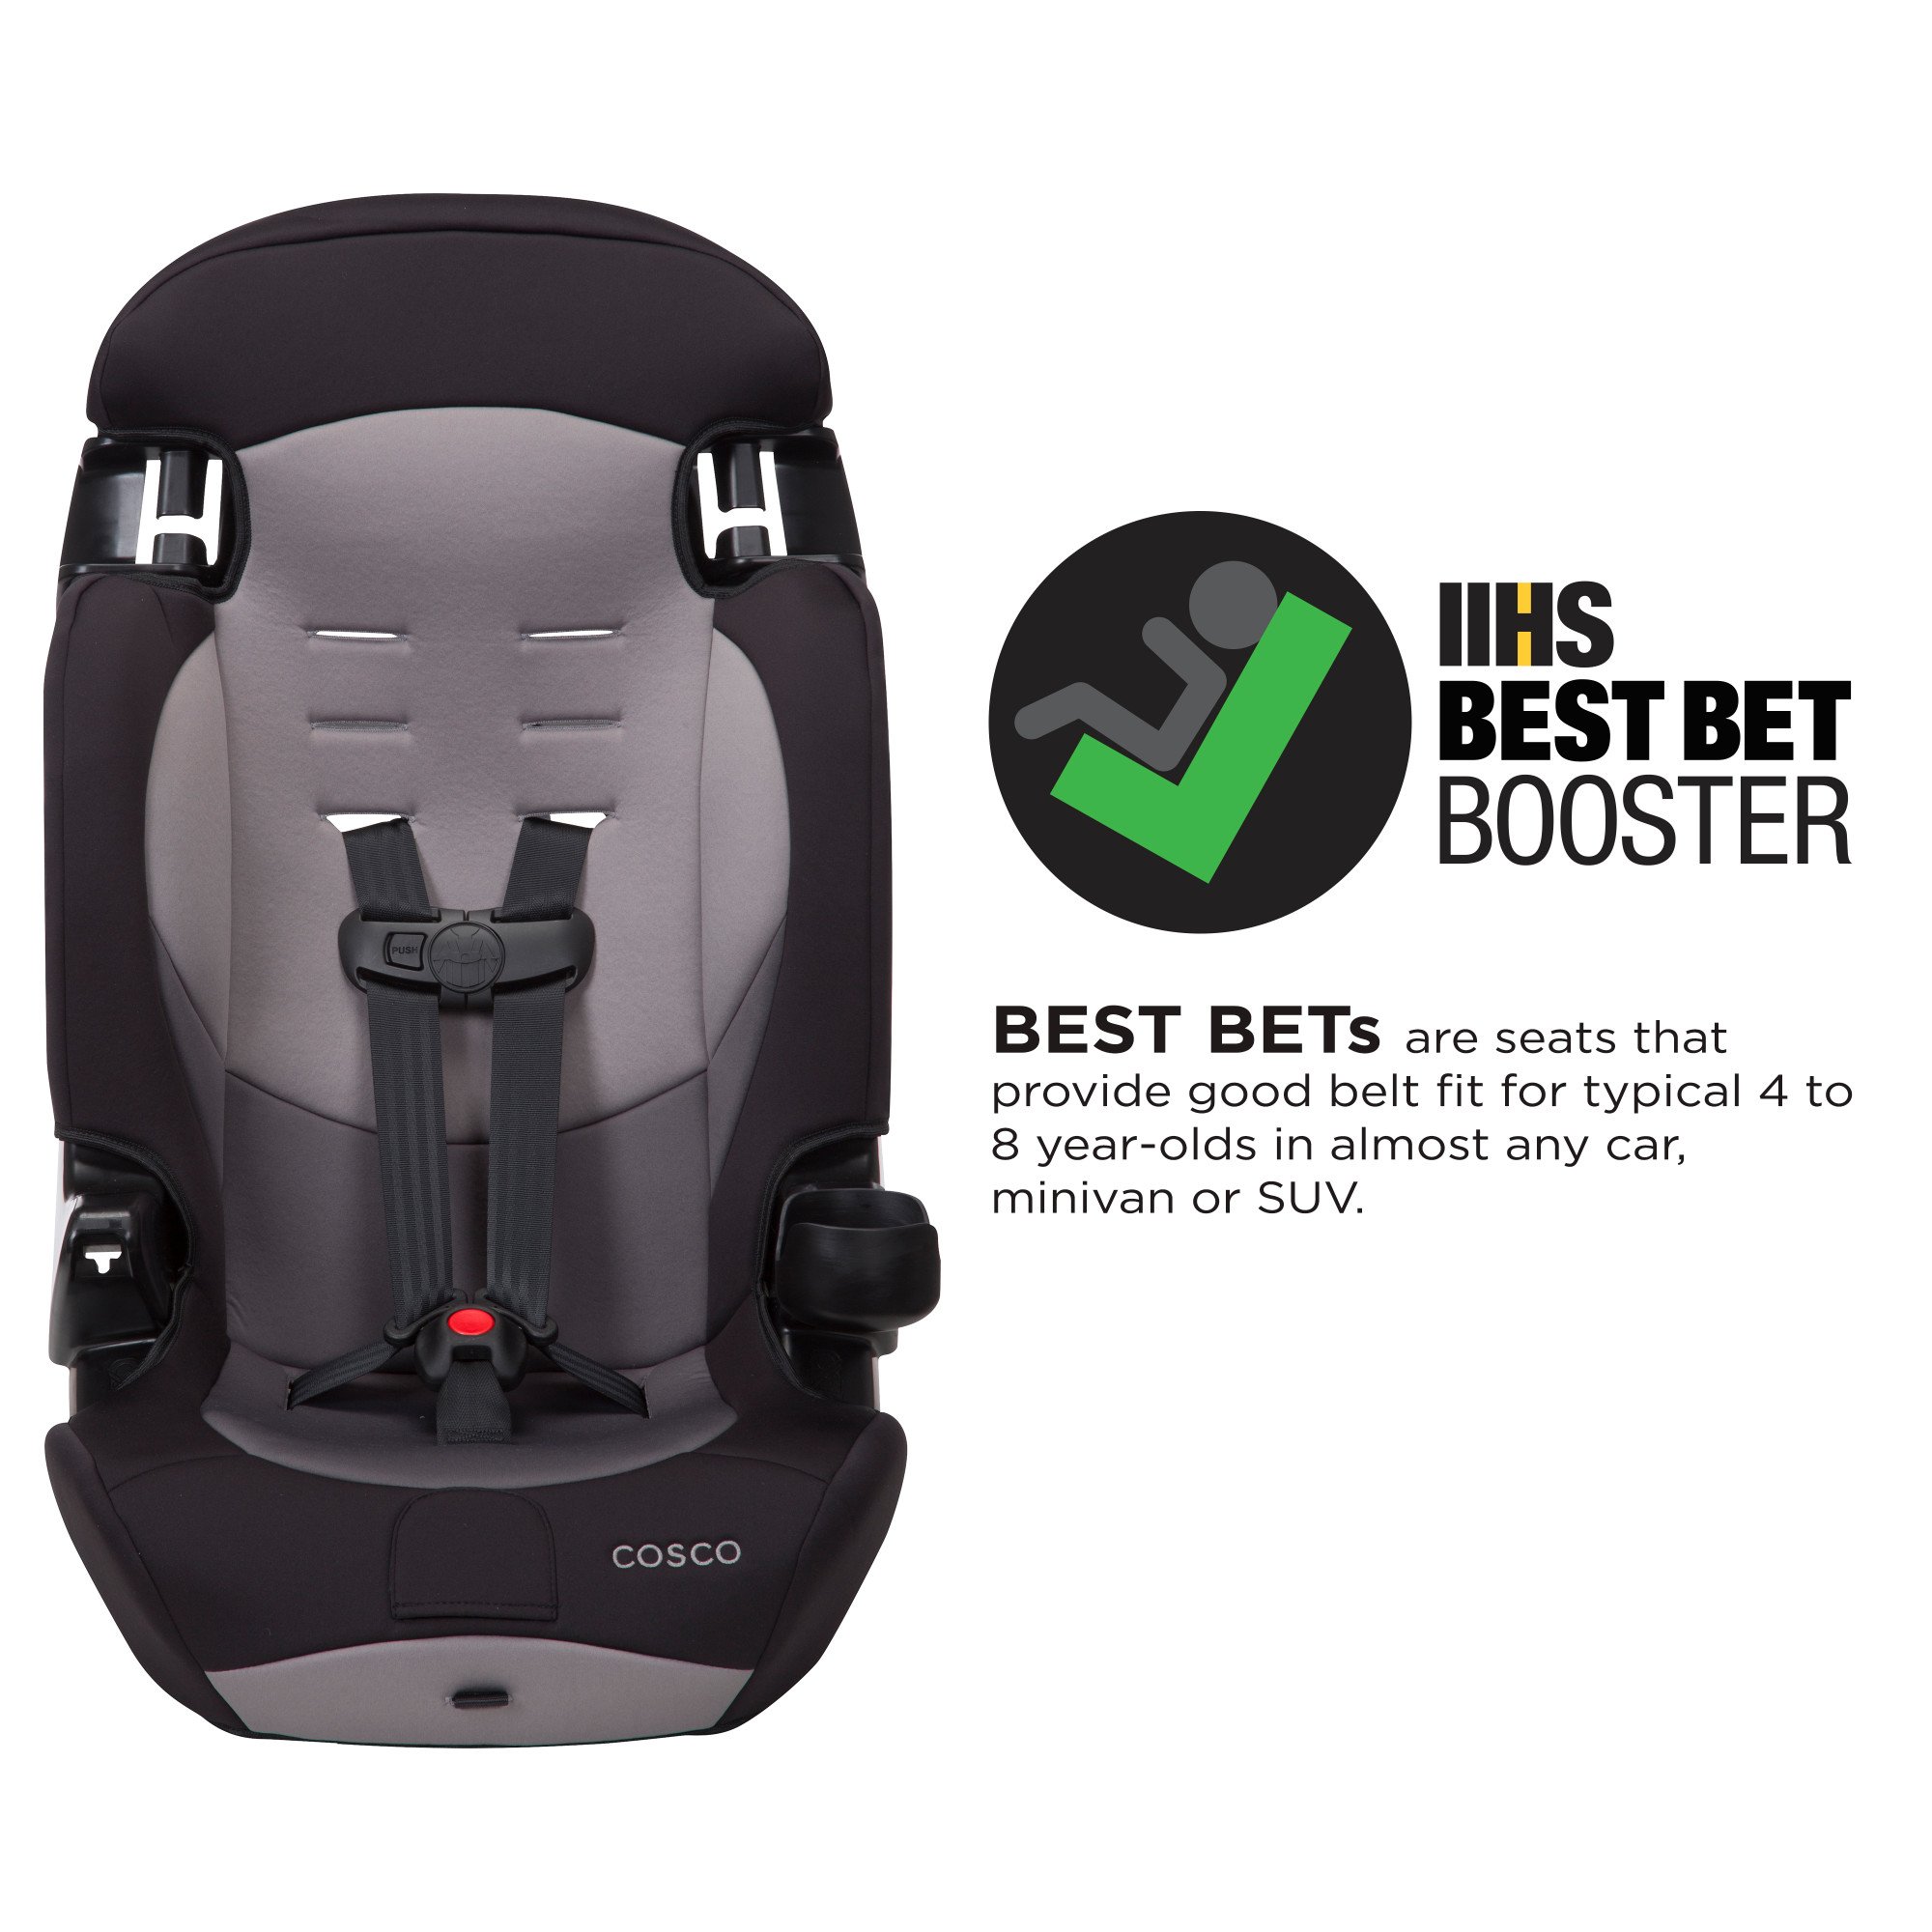 Cosco Onlook 2-in-1 Convertible Car Seat, Rear-Facing 5-40 pounds and Forward-Facing 22-40 pounds and up to 43 inches, Black Arrows & Finale Dx 2-in-1 Booster Car Seat, Dusk, 18.25x19x29.75 Inch